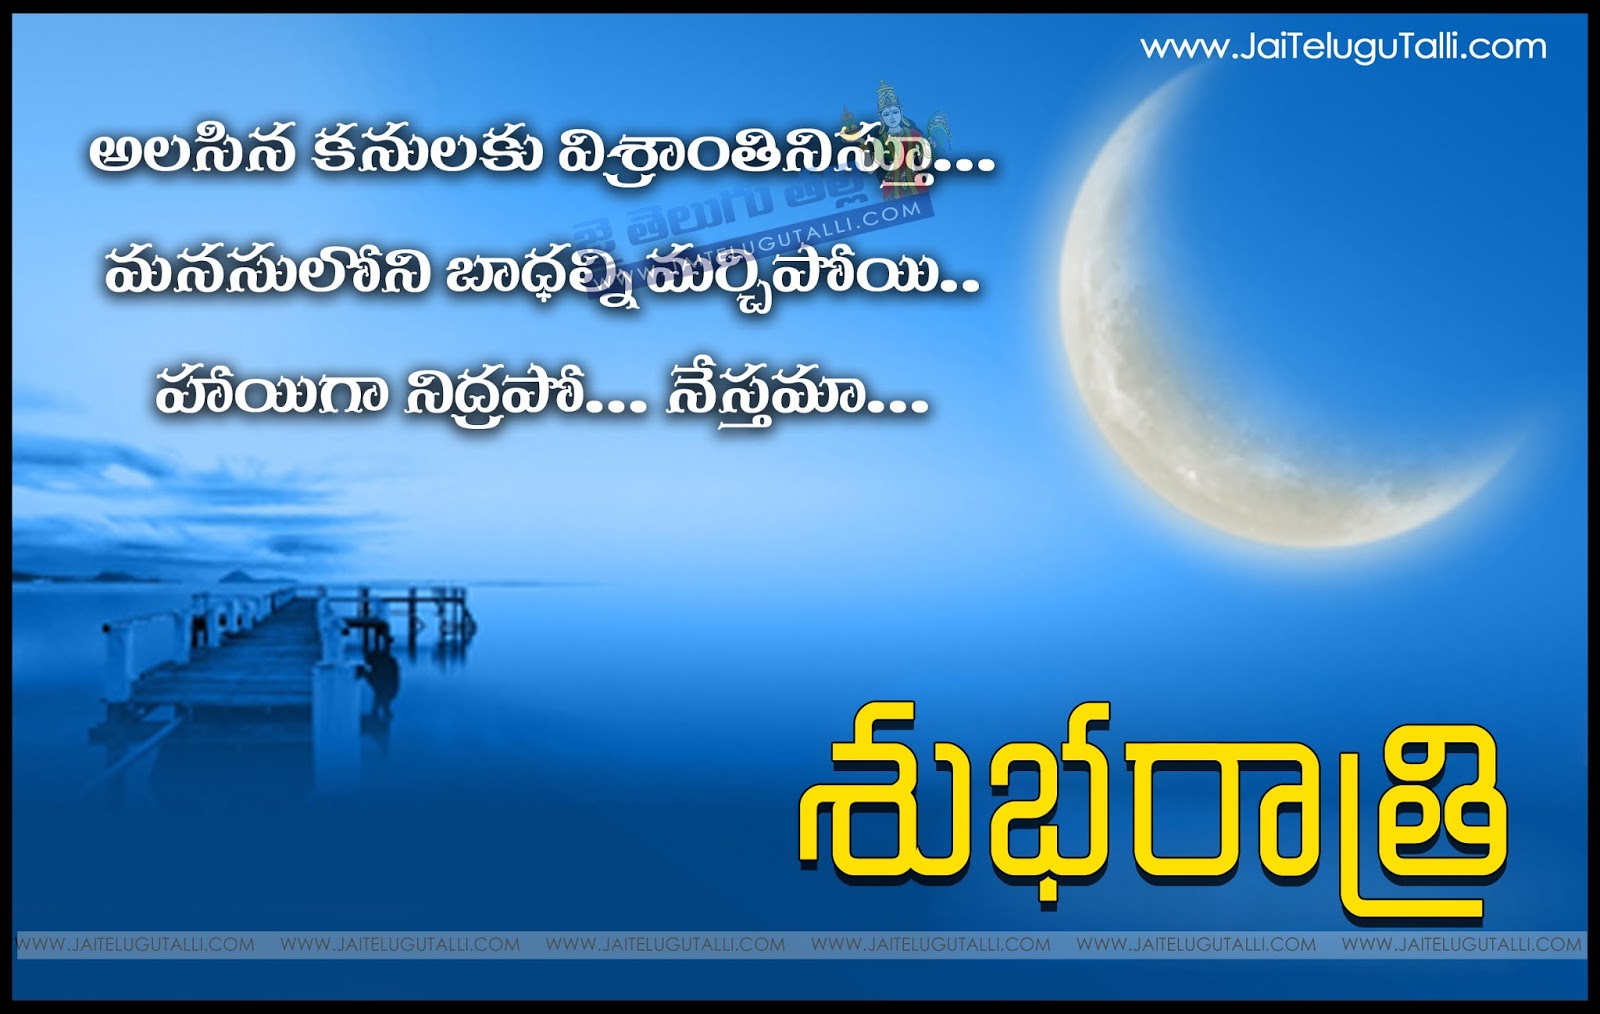 Good Night Wallpapers Telugu Quotes Wishes for Whatsapp